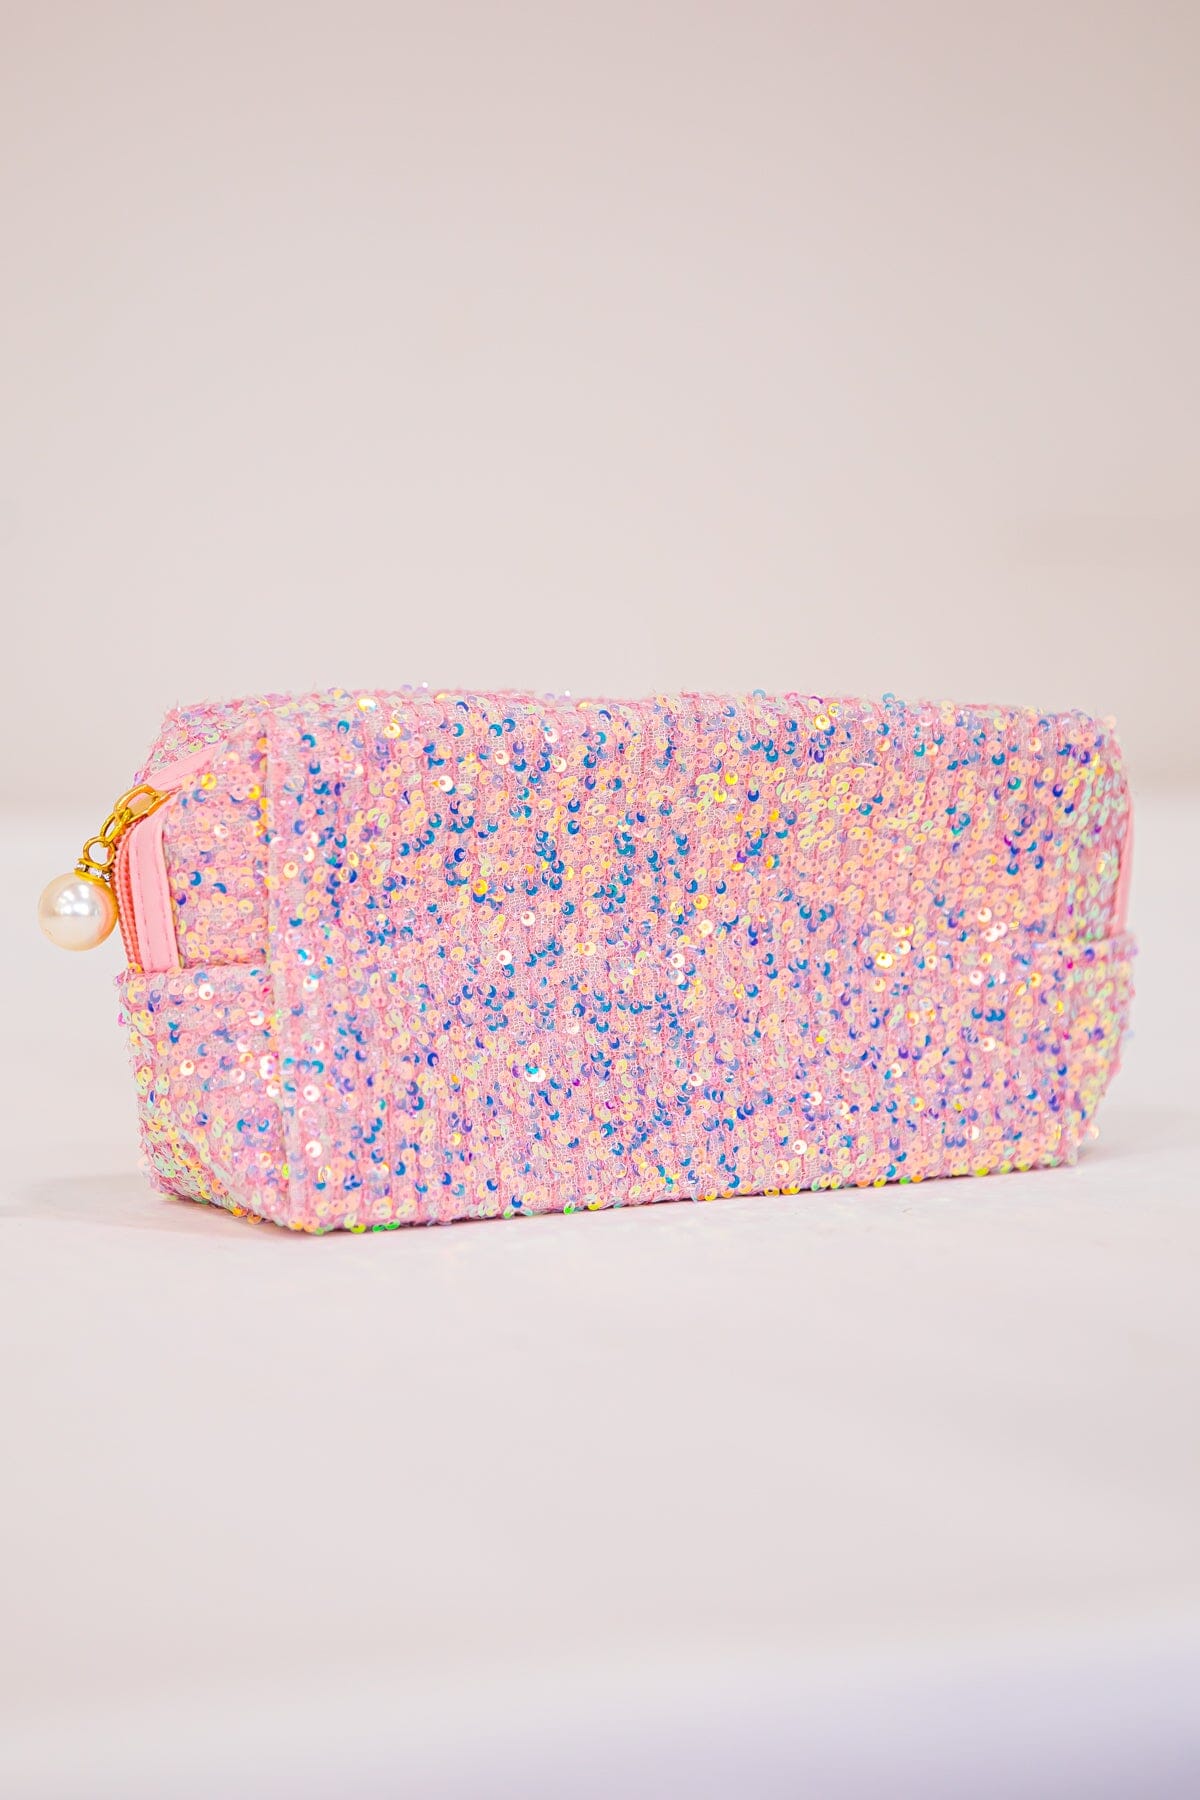 Blush Multicolor Sequin Makeup Bag - Filly Flair